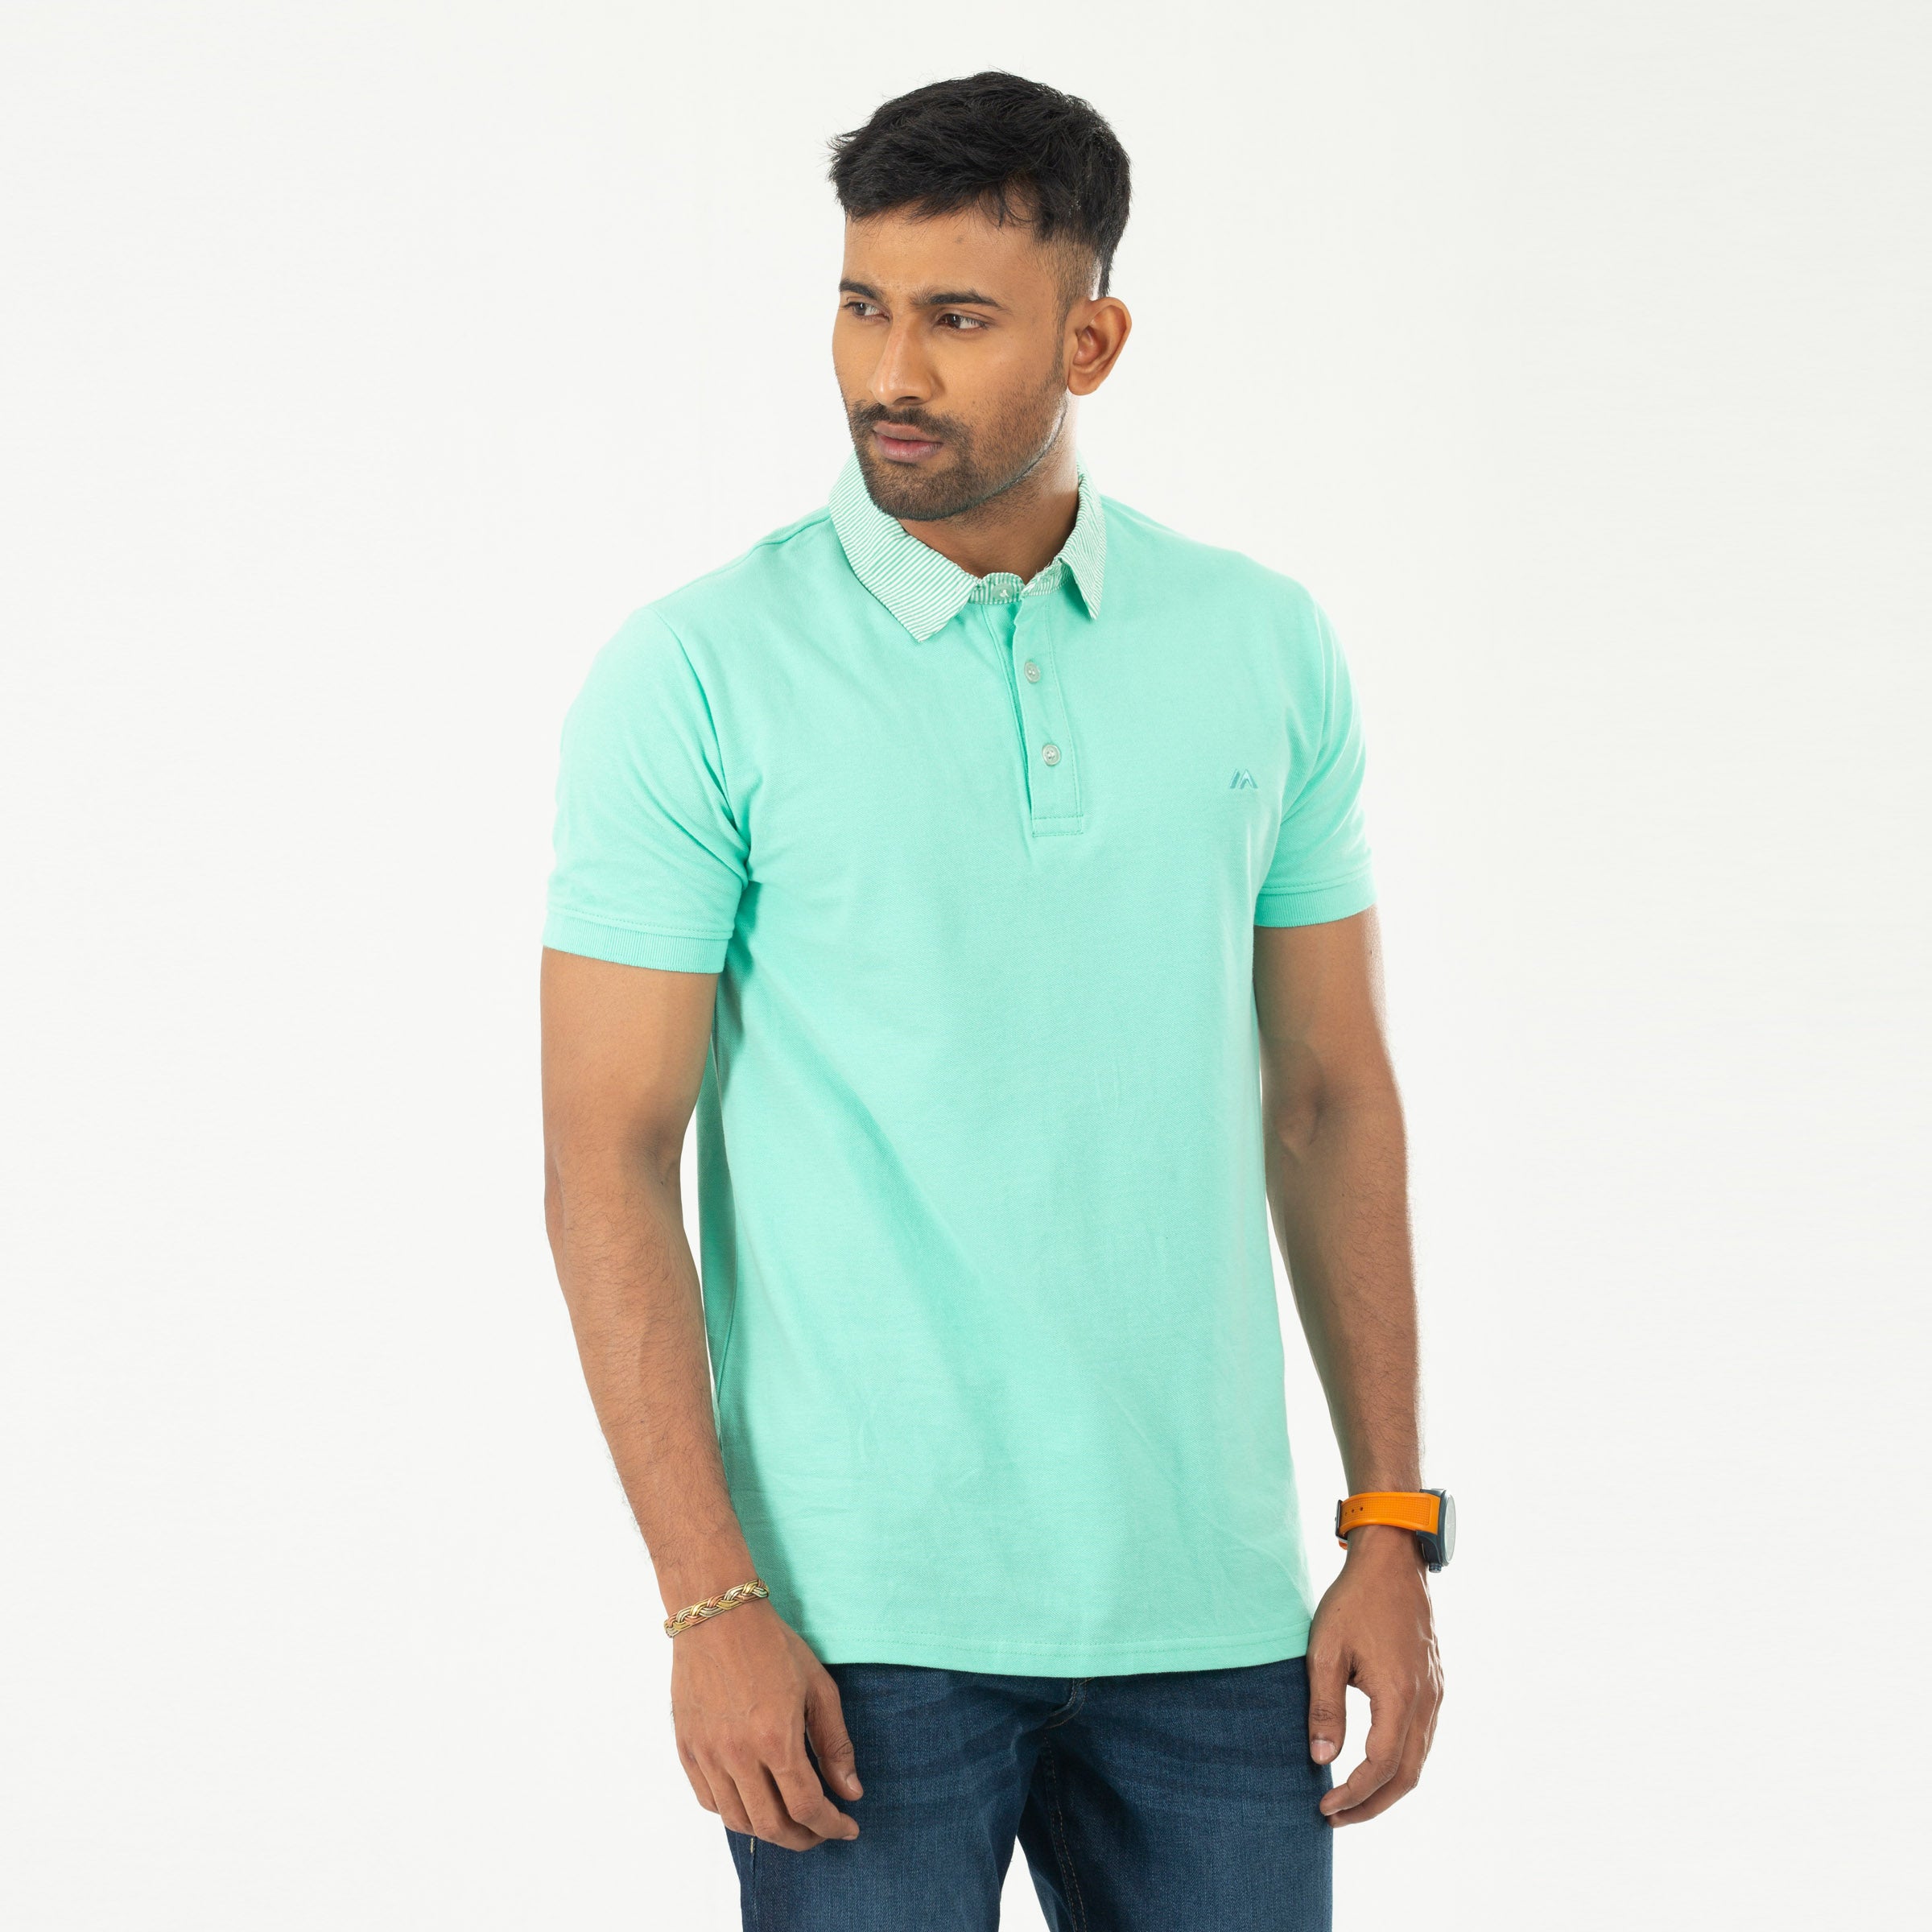 Woven Collar Contrast Solid Polo - Turquoise